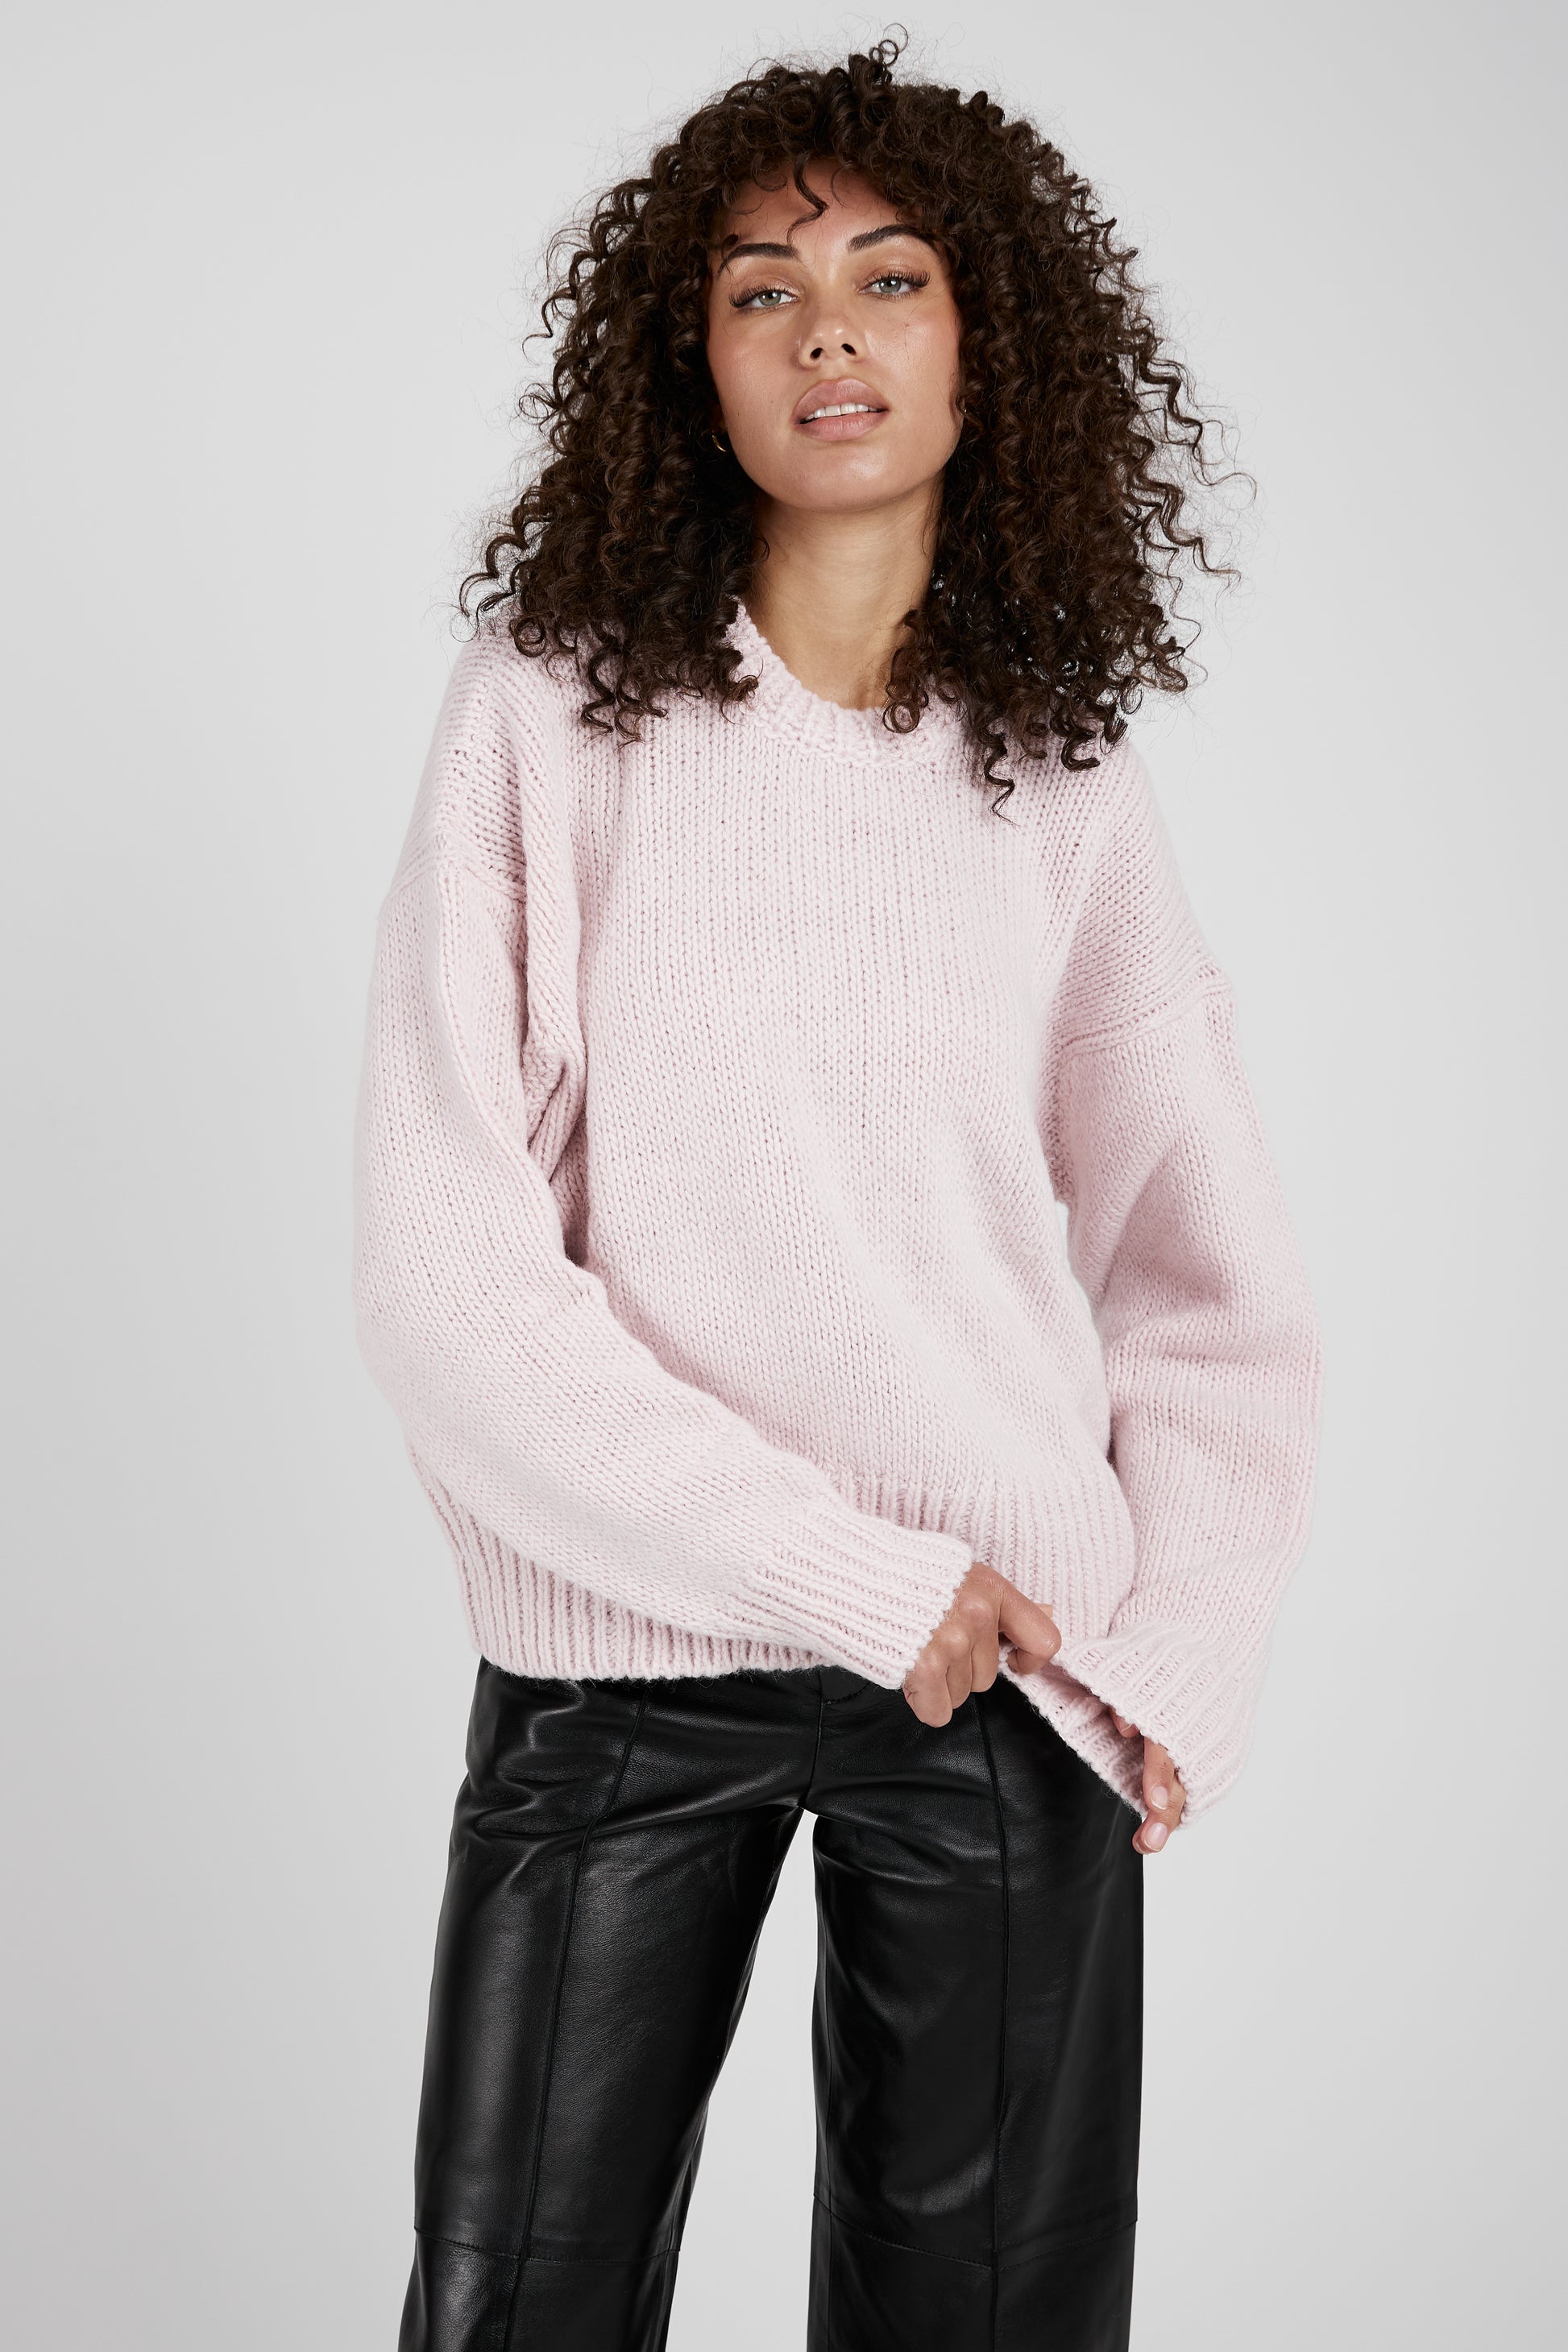 N°21 Round Neck Oversized Sweater in Soft Pink